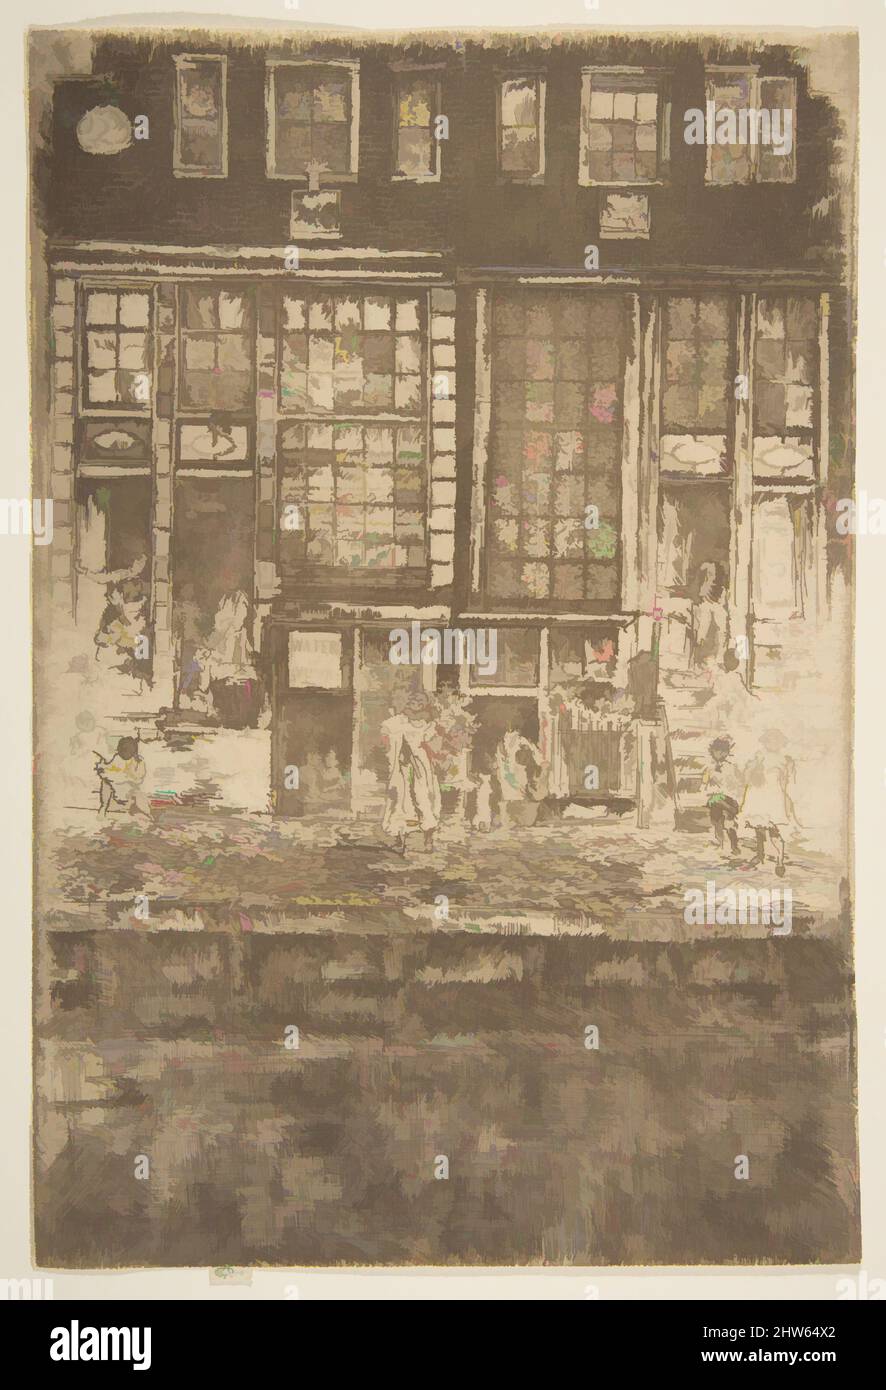 Art inspired by The Embroidered Curtain, 1889, Etching and drypoint; sixth state of ten (Glasgow); printed in dark brown ink on fine ivory laid paper, Plate: 9 5/16 × 6 1/4 in. (23.7 × 15.9 cm), Prints, James McNeill Whistler (American, Lowell, Massachusetts 1834–1903 London), Whistler, Classic works modernized by Artotop with a splash of modernity. Shapes, color and value, eye-catching visual impact on art. Emotions through freedom of artworks in a contemporary way. A timeless message pursuing a wildly creative new direction. Artists turning to the digital medium and creating the Artotop NFT Stock Photo